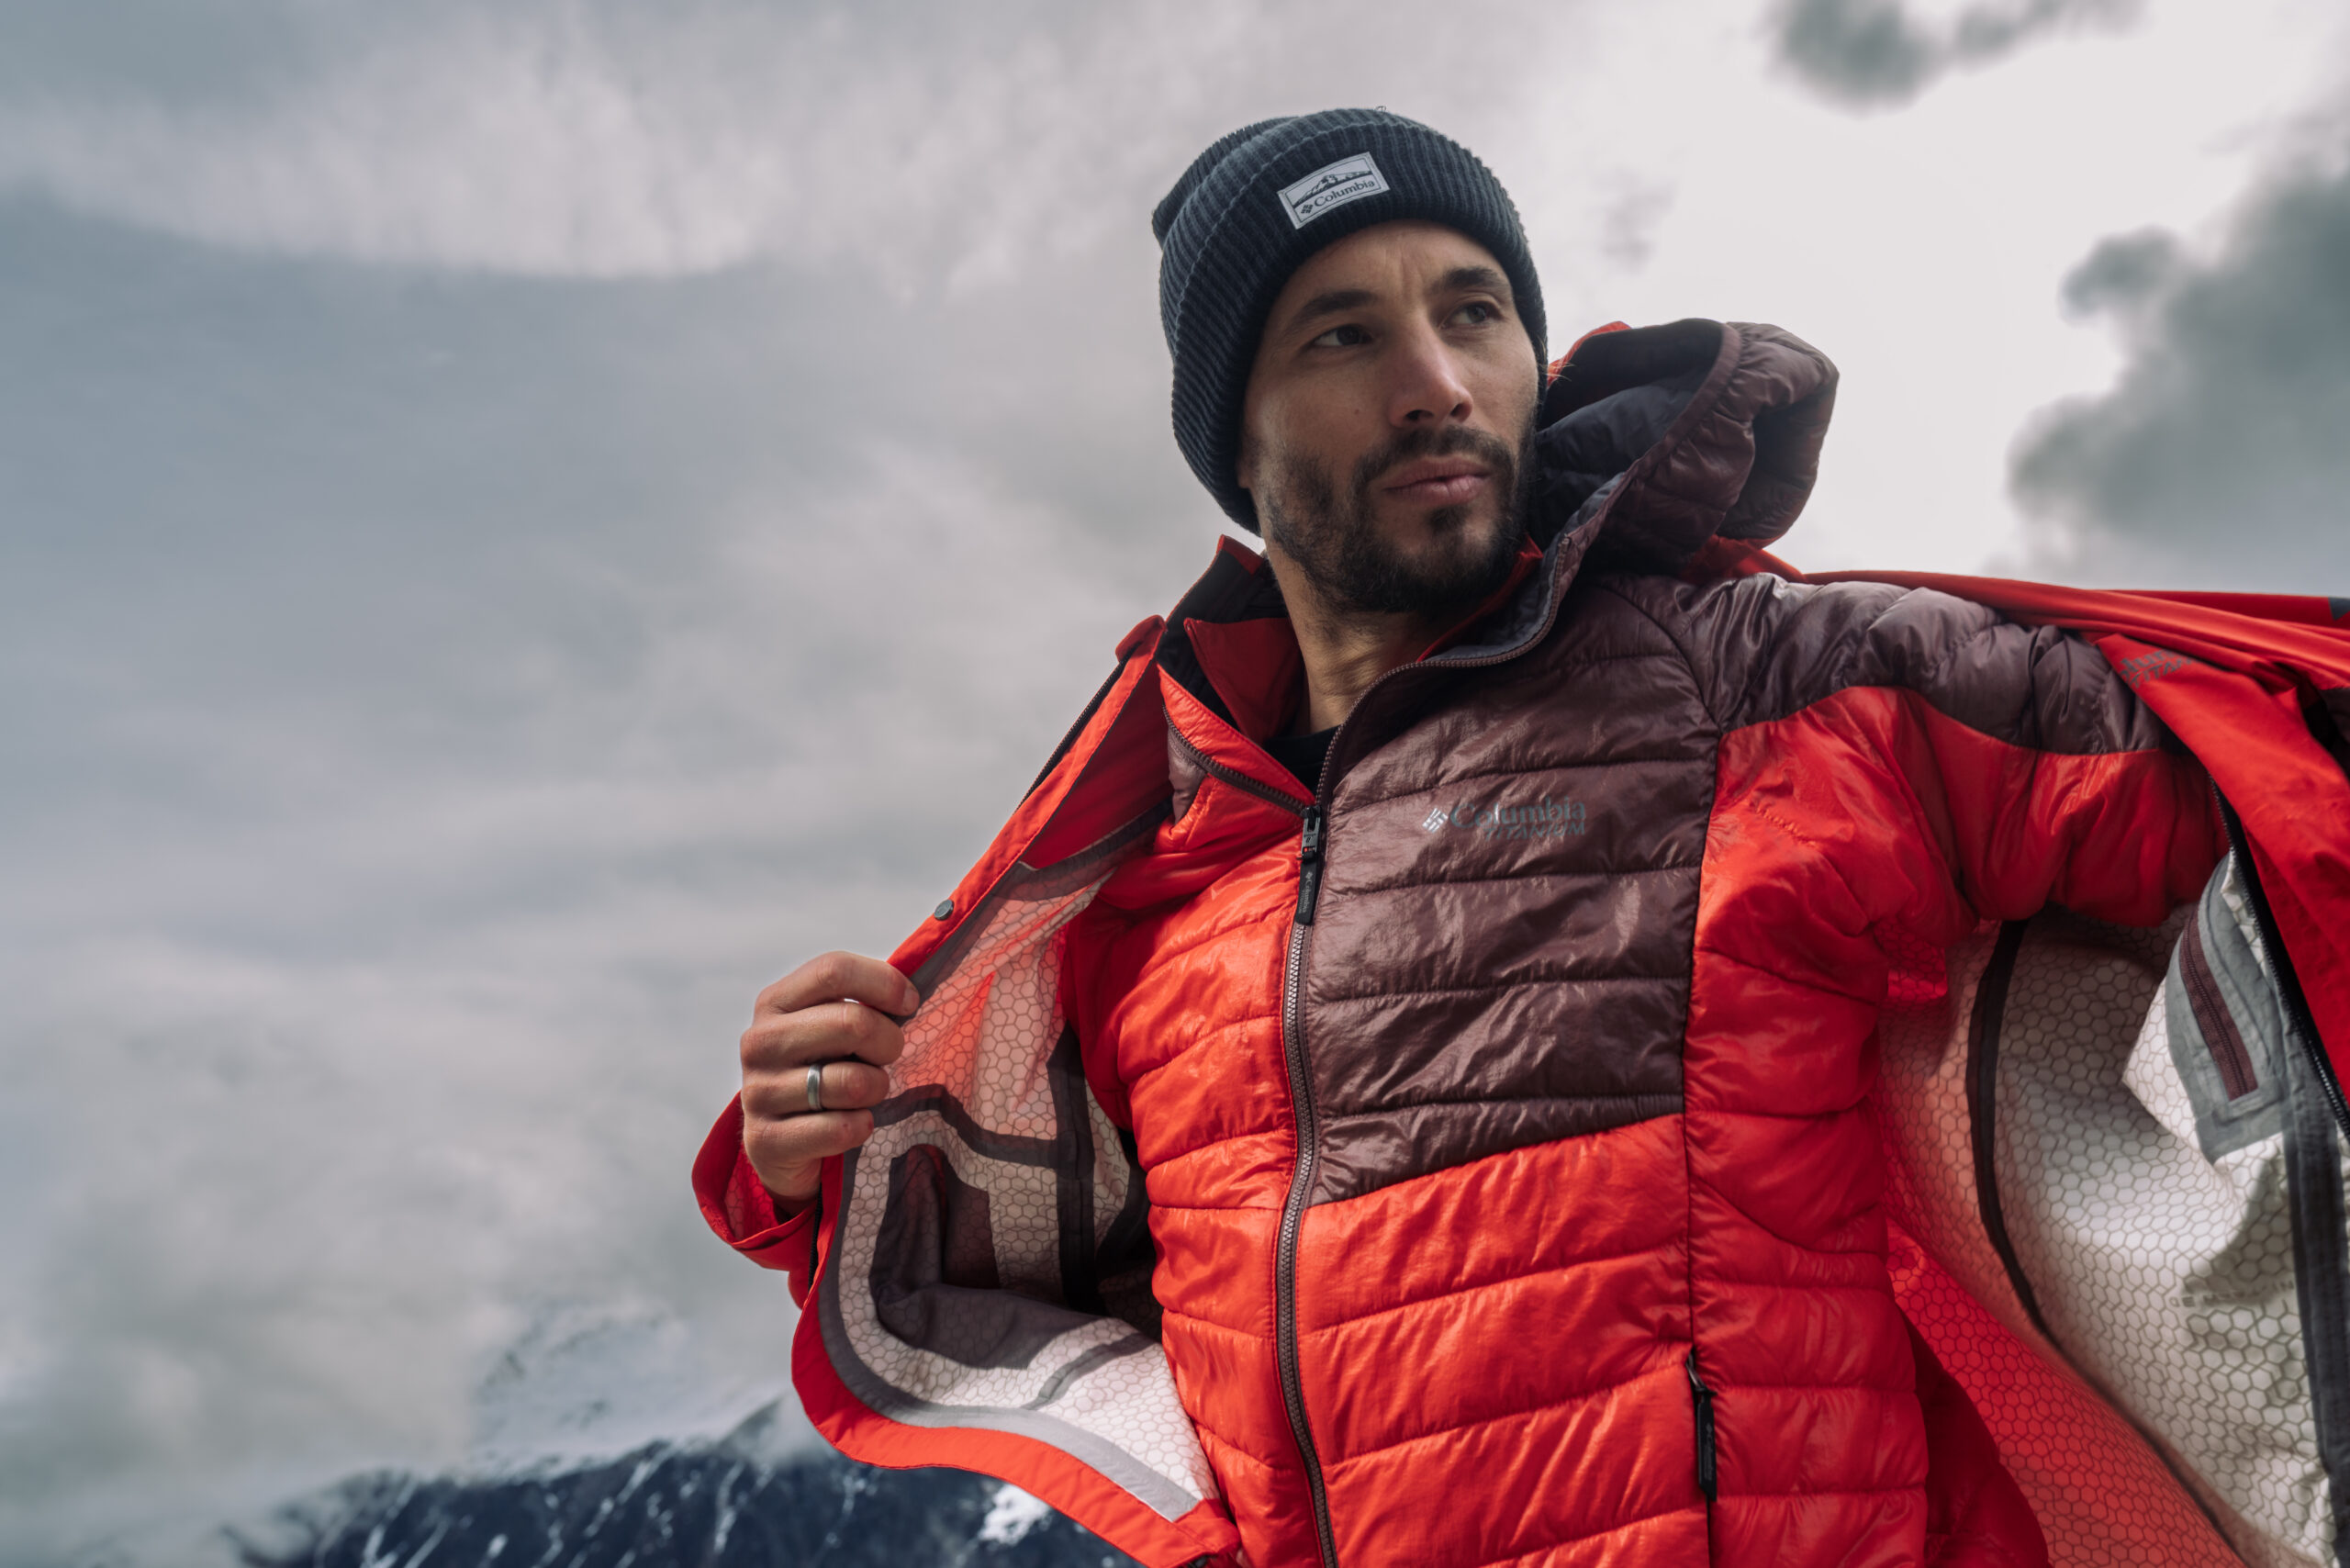 Columbia launches new Titanium collection - The Pill Outdoor Journal